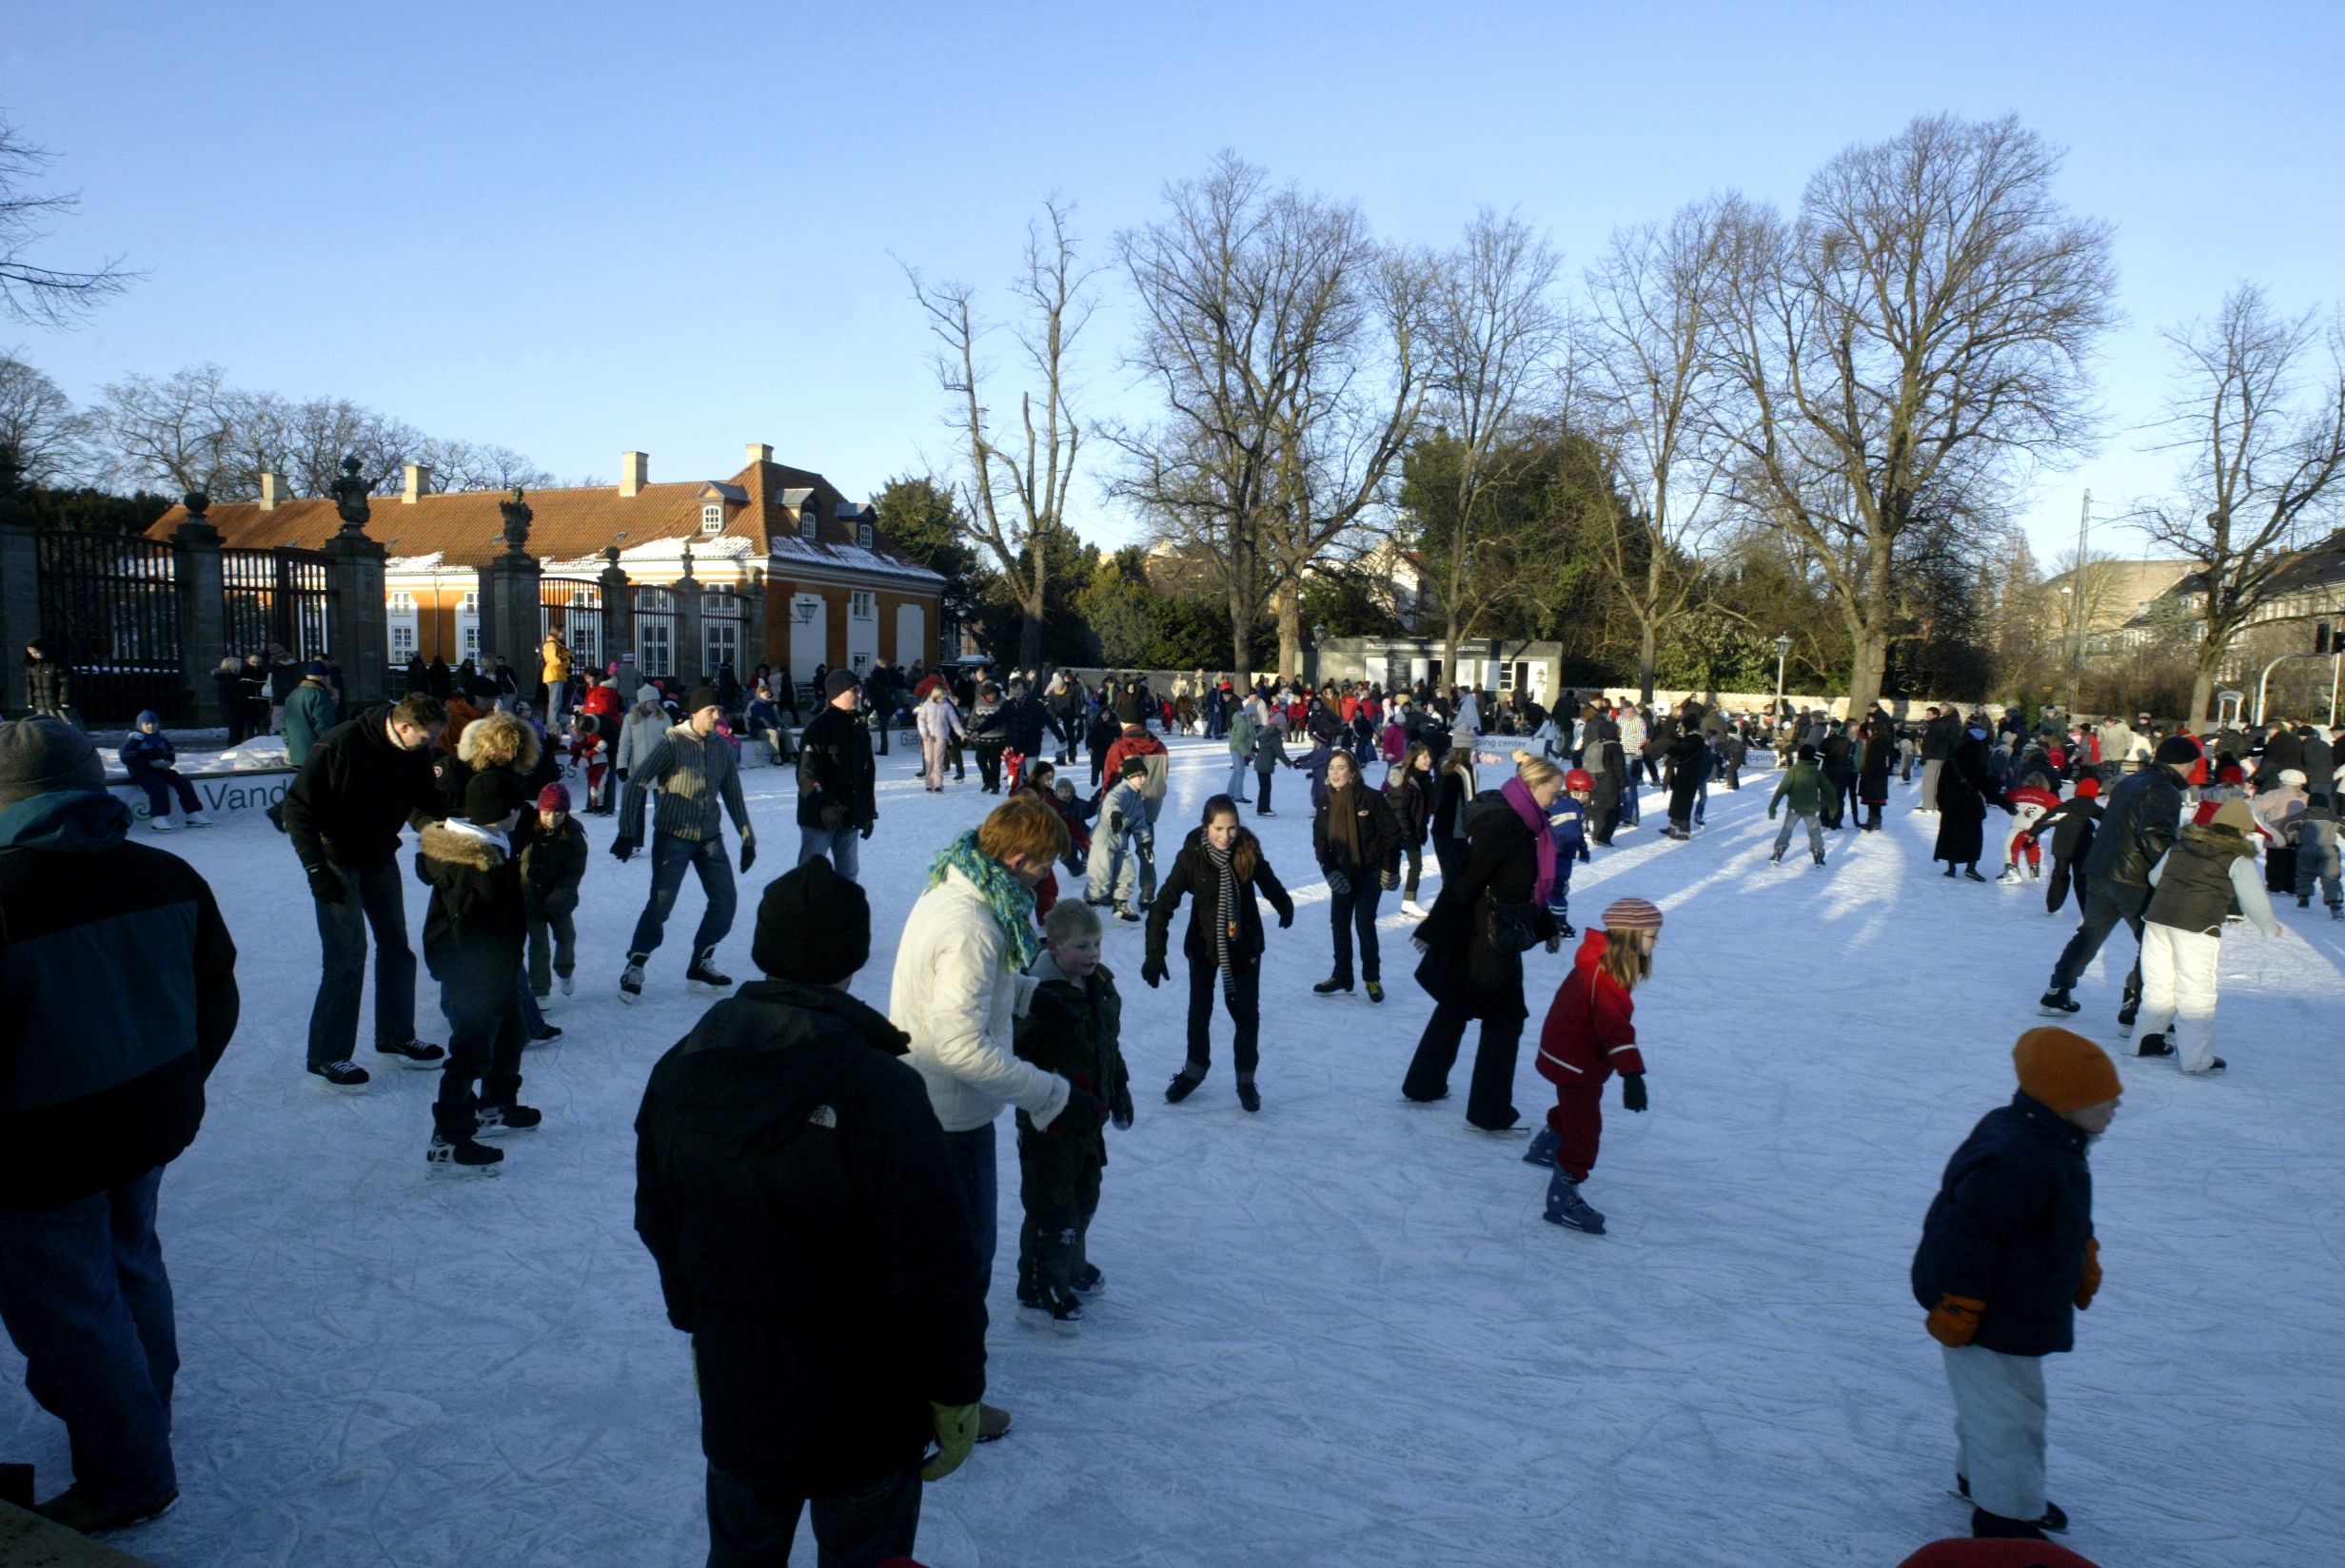 Rinky dinky doo – go skating this winter with Kids Corner